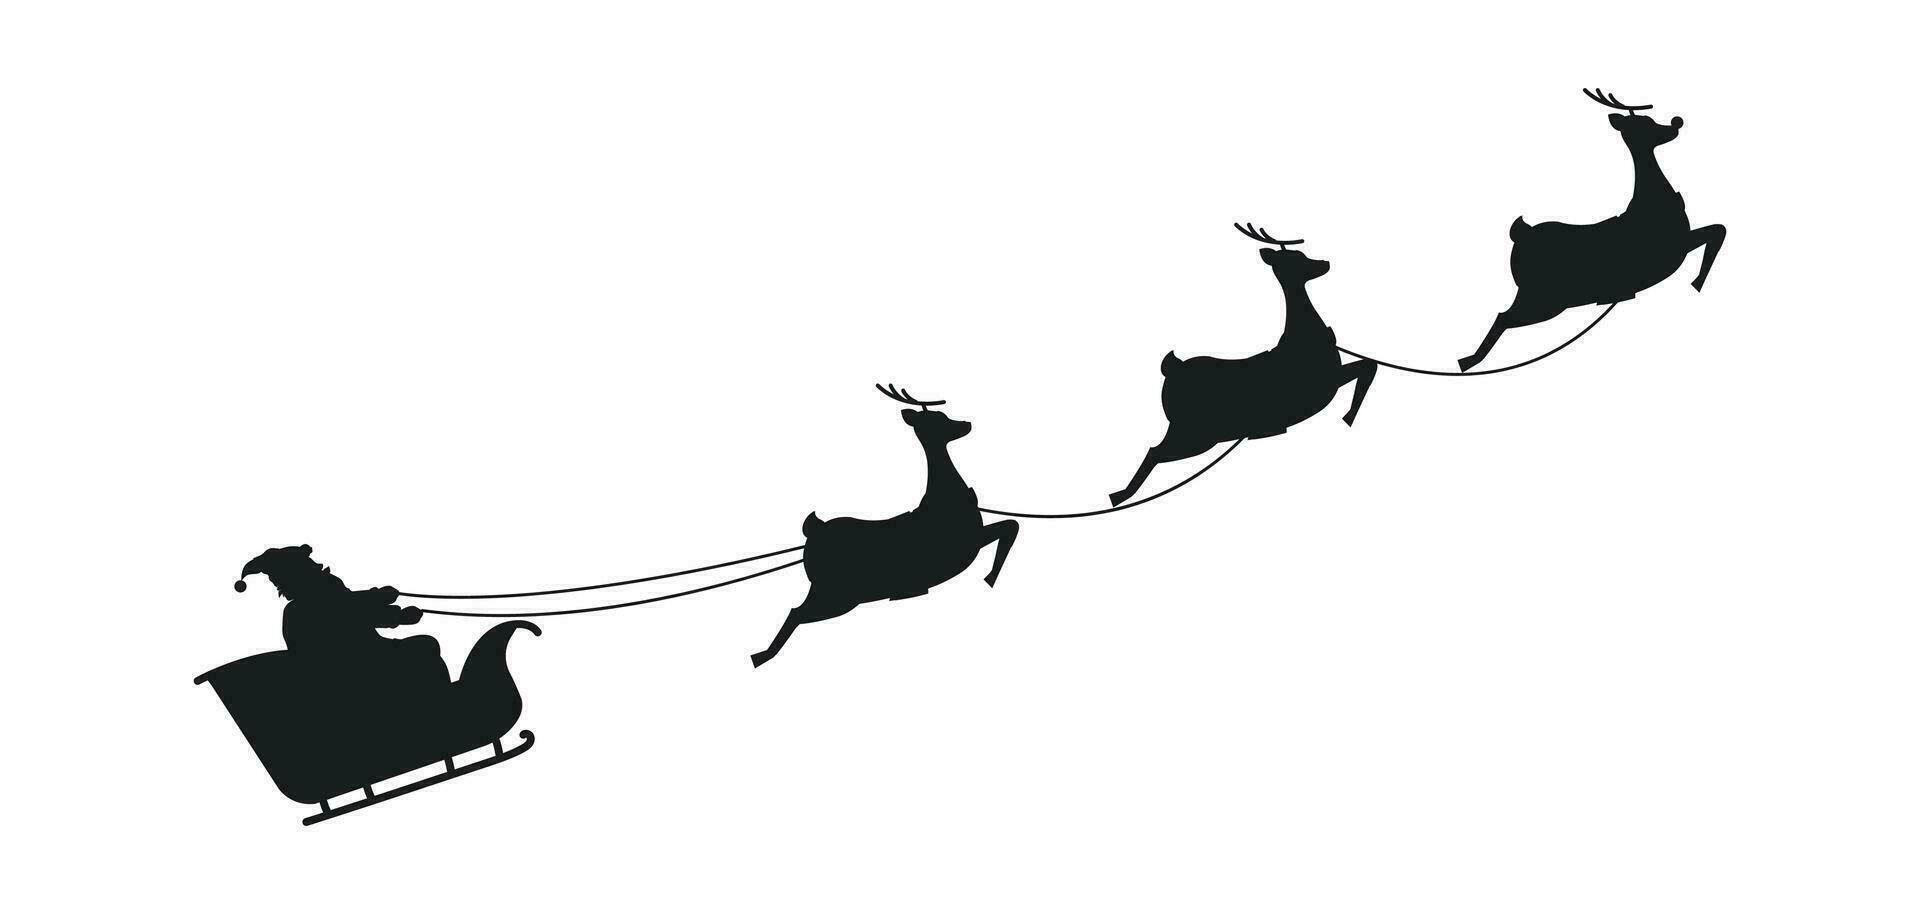 Dark silhouette of Santa Claus riding in a sleigh. Christmas design element. Isolated on white. vector